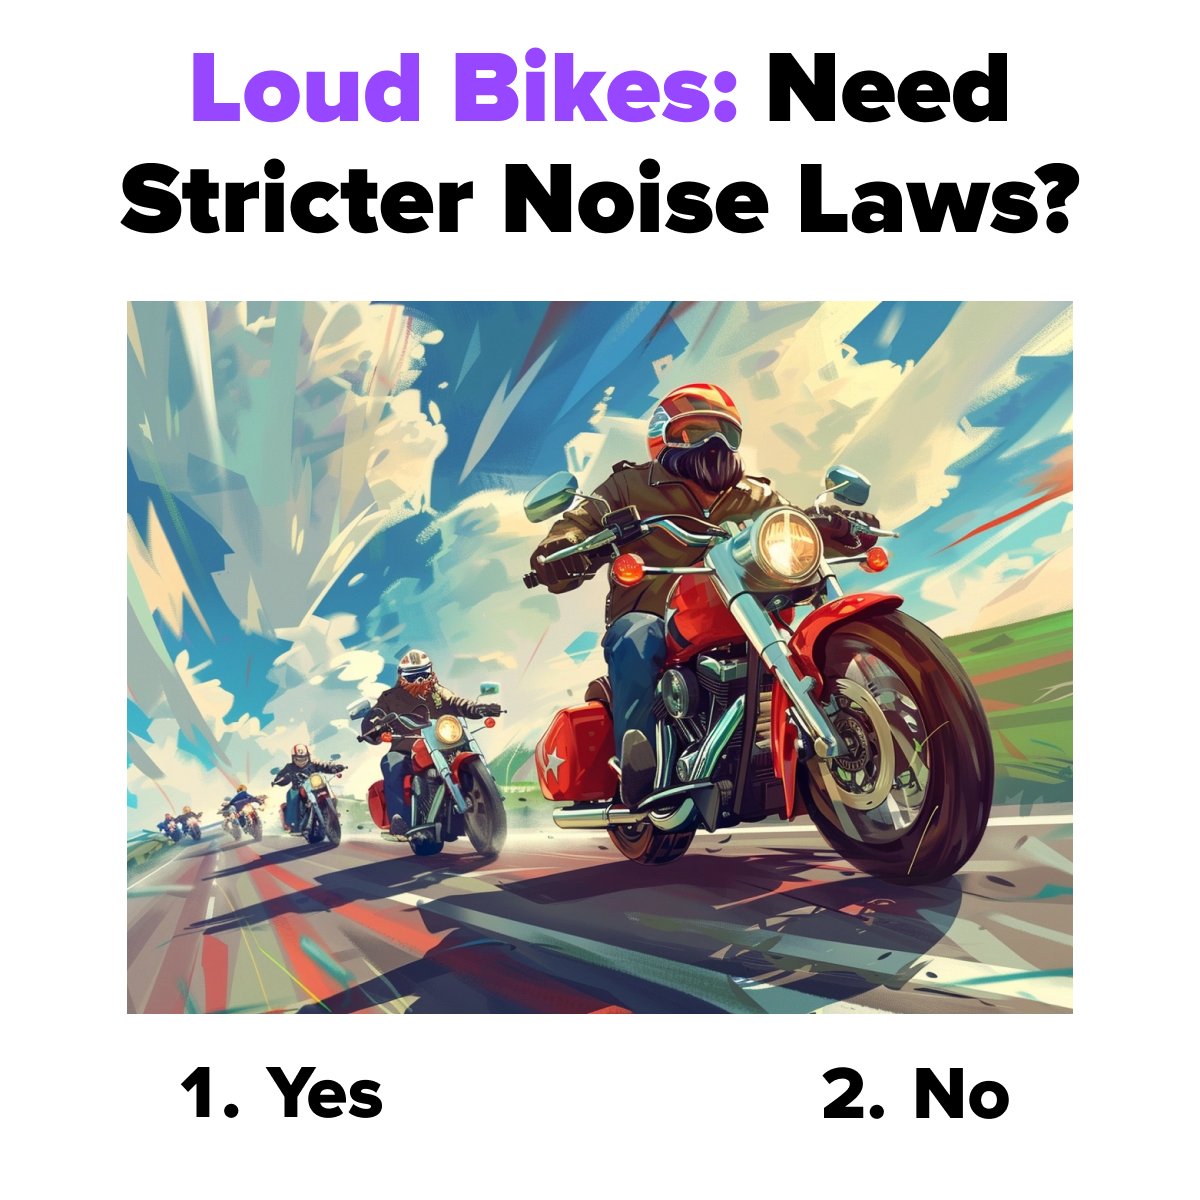 Roaring down the road but at what cost? 🏍️💥 Should noise rules for bikes be tougher? Vote 1 for Yes, 2 for No. #SoundOff